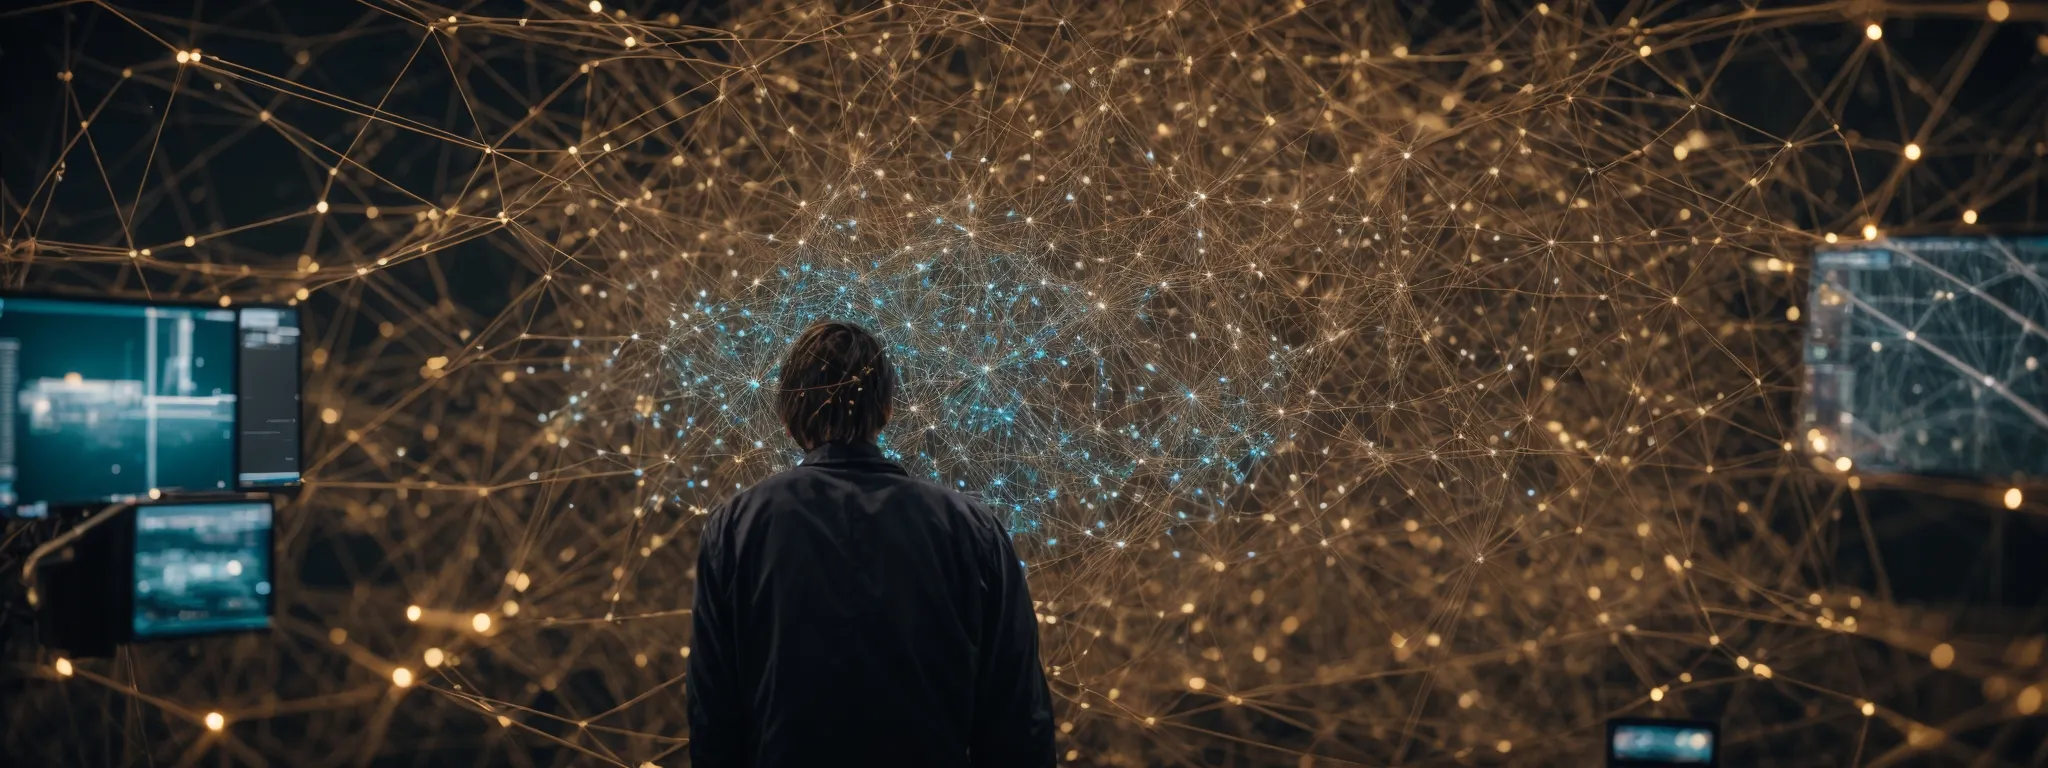 a researcher intently studies a large, intricate network visualization showcasing clusters of interconnected ideas and concepts.